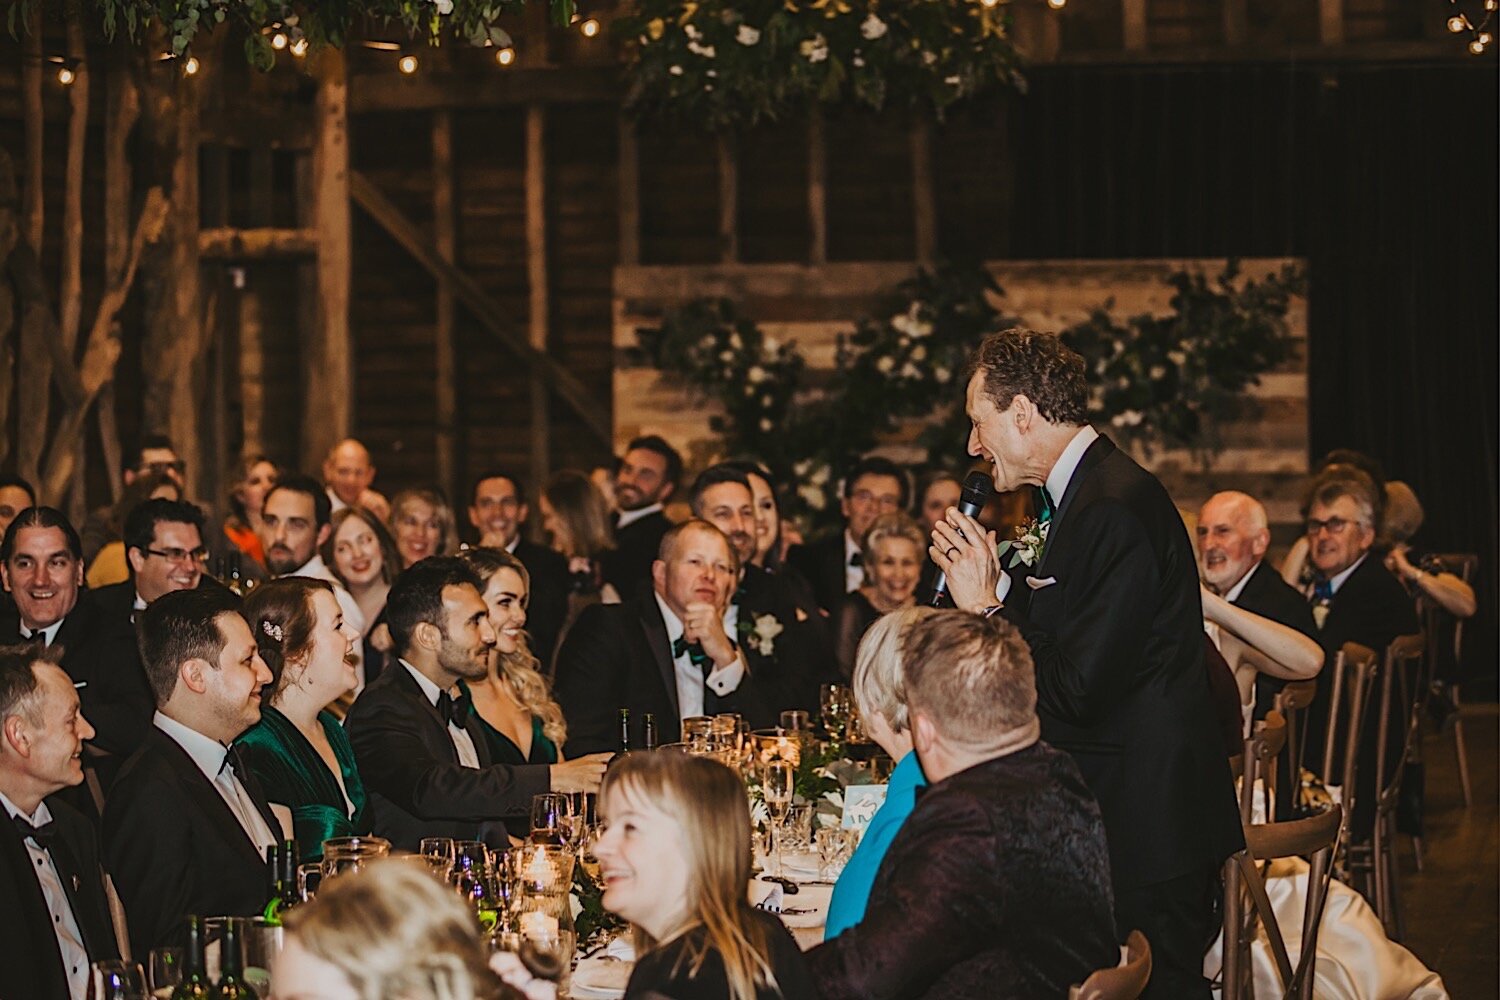 076_TWS-811_style_hertfordshire_love_action_winter_farmhouse_redcoats_barn_festive_laughter_photography_herts_bride_speeches_wedding_reportage_documentary_venue_photographer_goals_emotion_groom.jpg